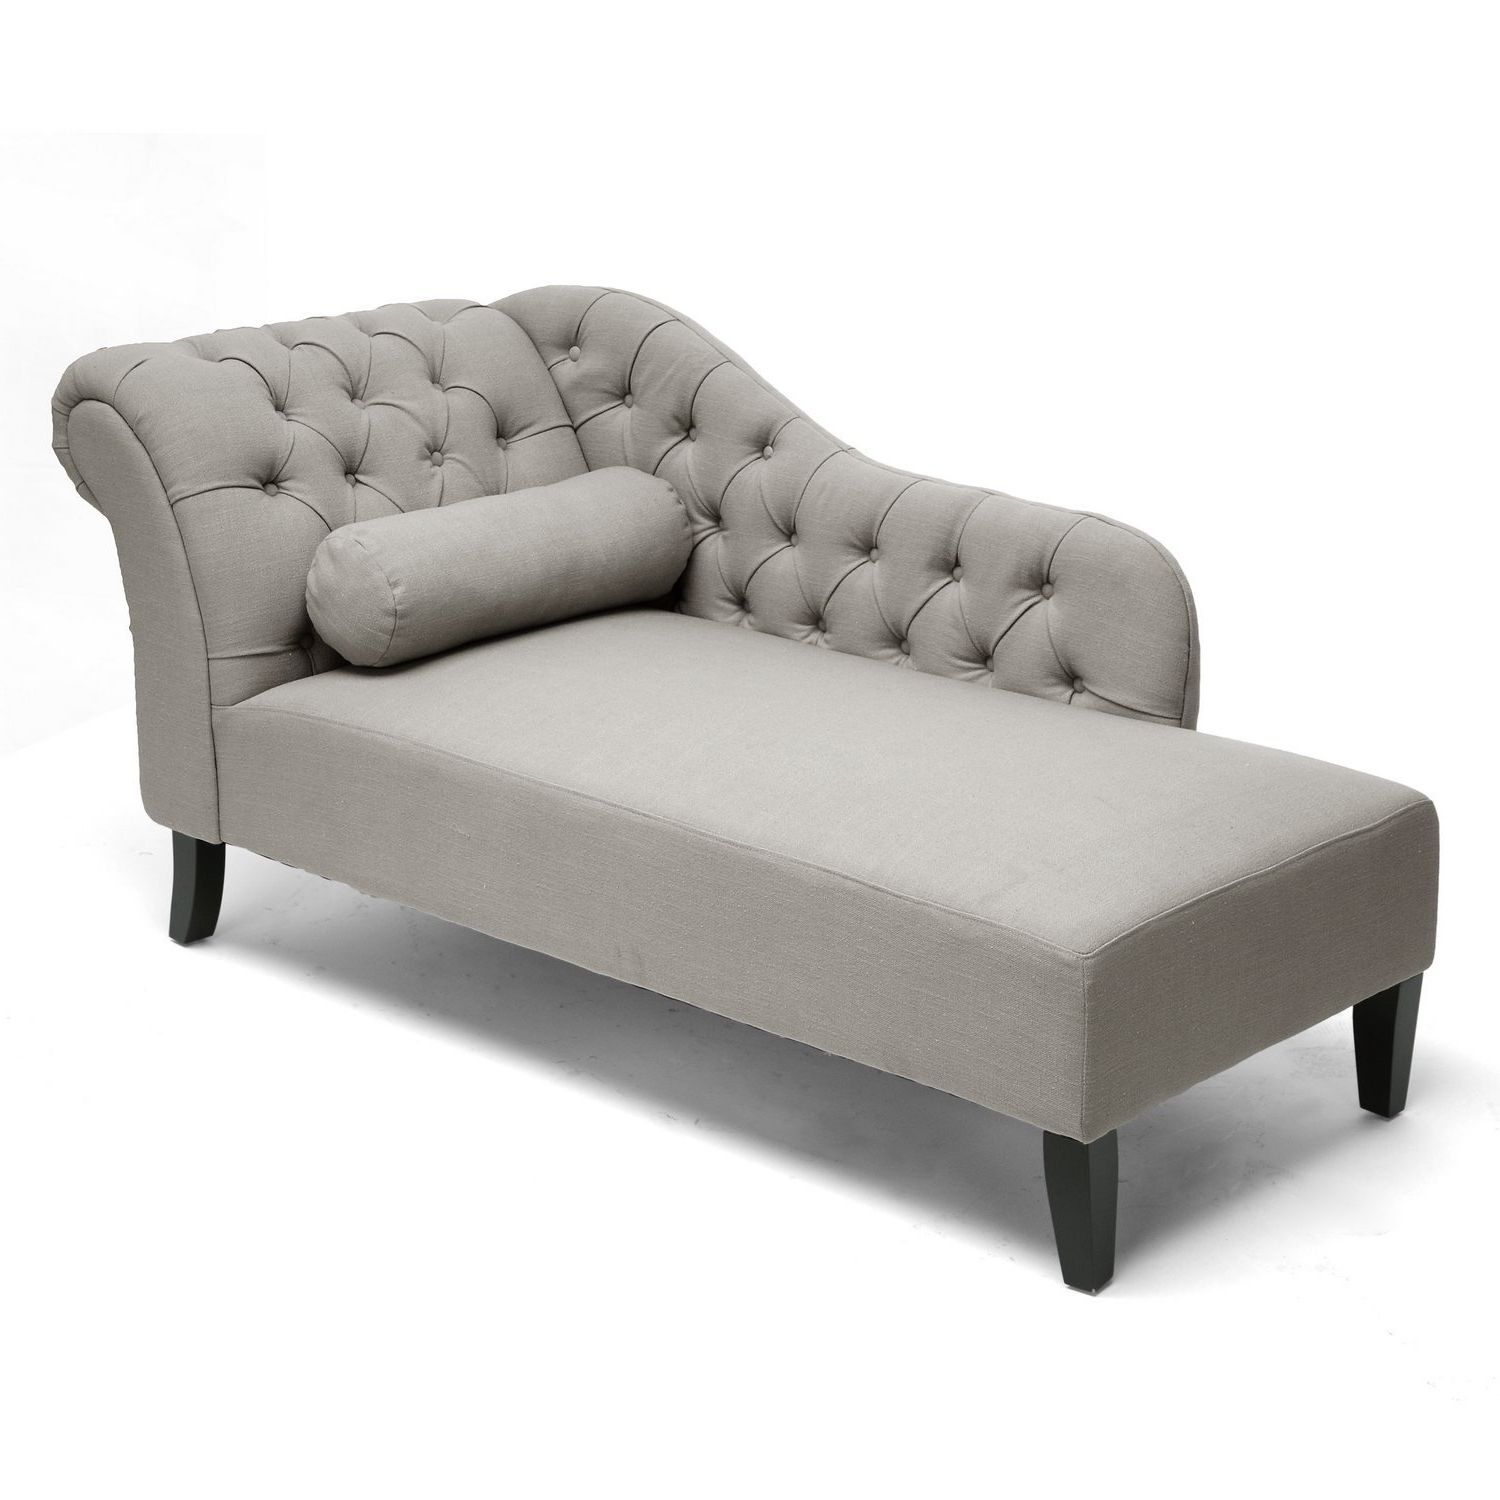 Most Popular Grey Chaises Pertaining To Velvet Grey Chaise Lounge — Interior Exterior Homie : Choosing (View 8 of 15)